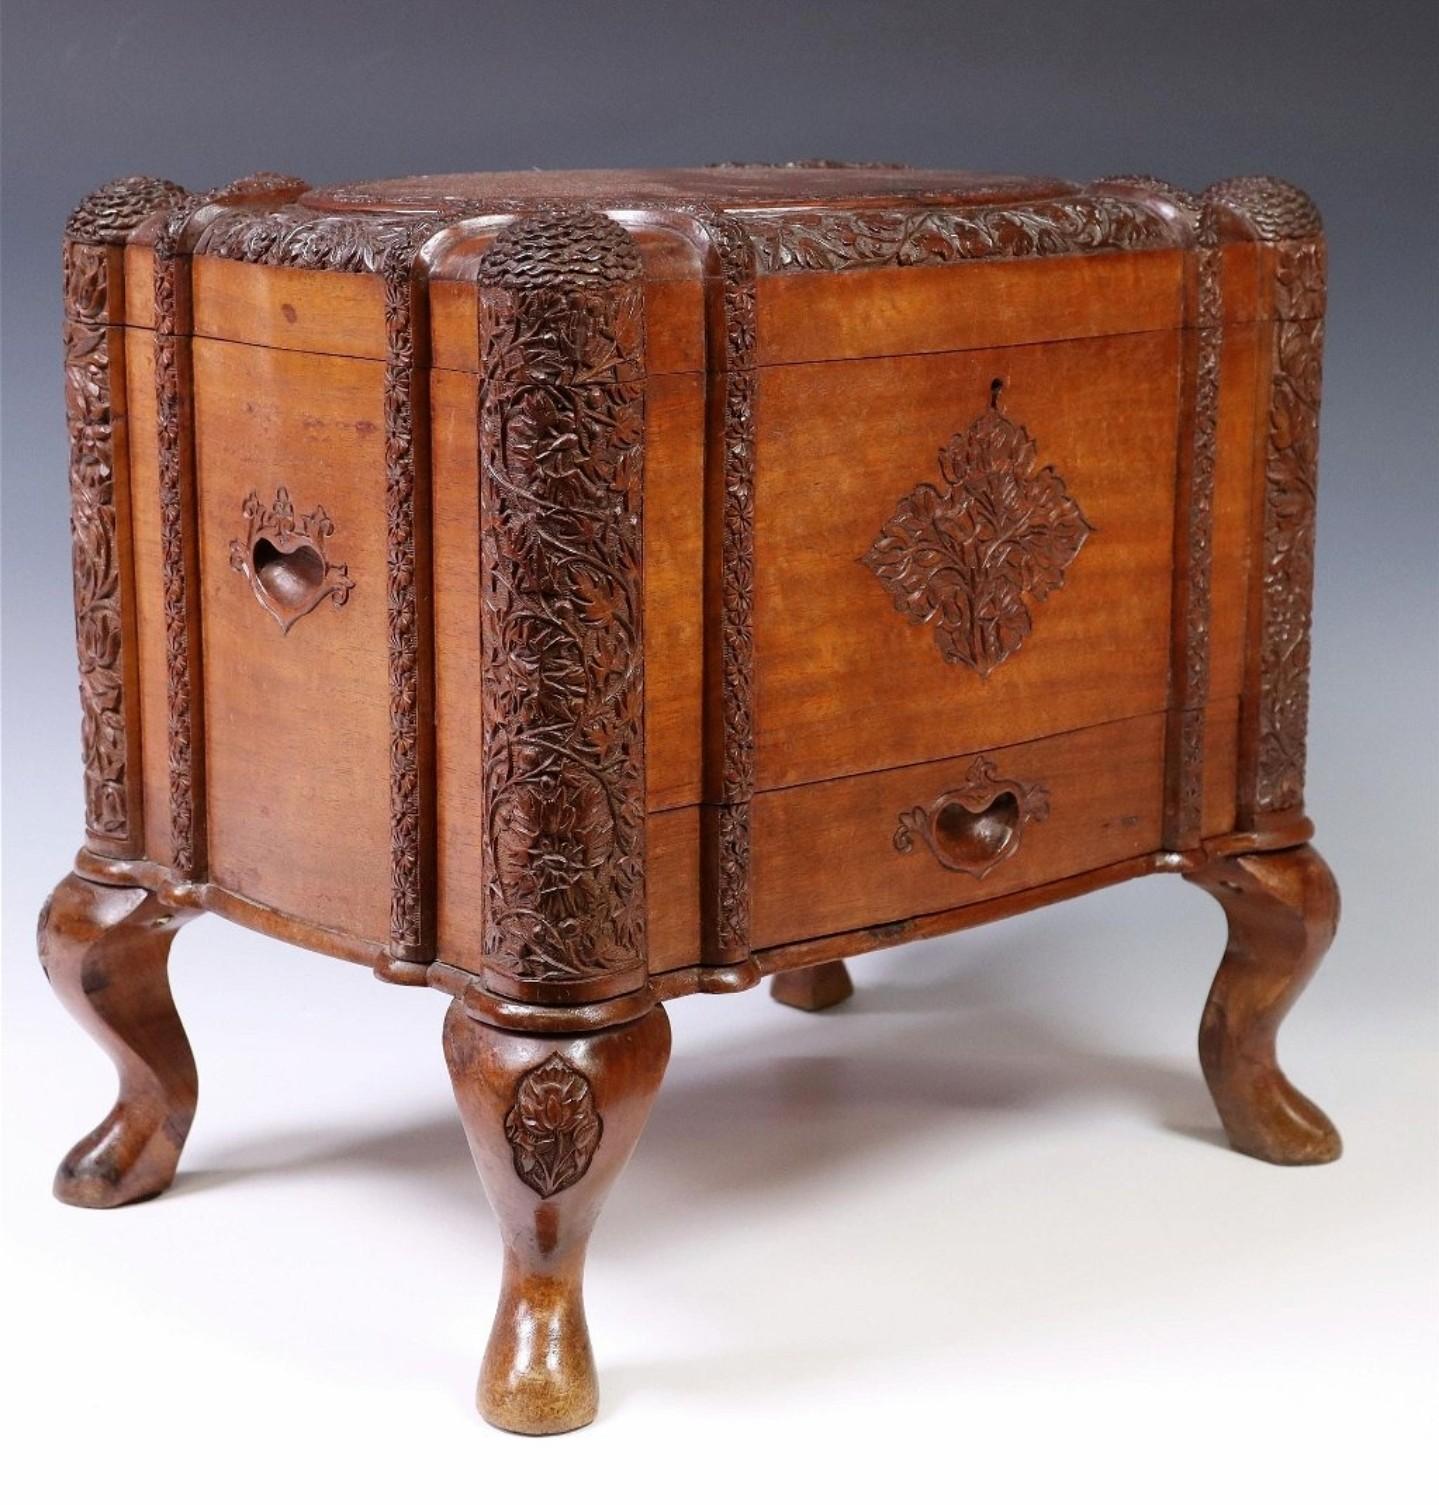 Hand-Carved Antique South Asian Colonial Carved Camphor Wood Table Box / Jewelry Casket For Sale